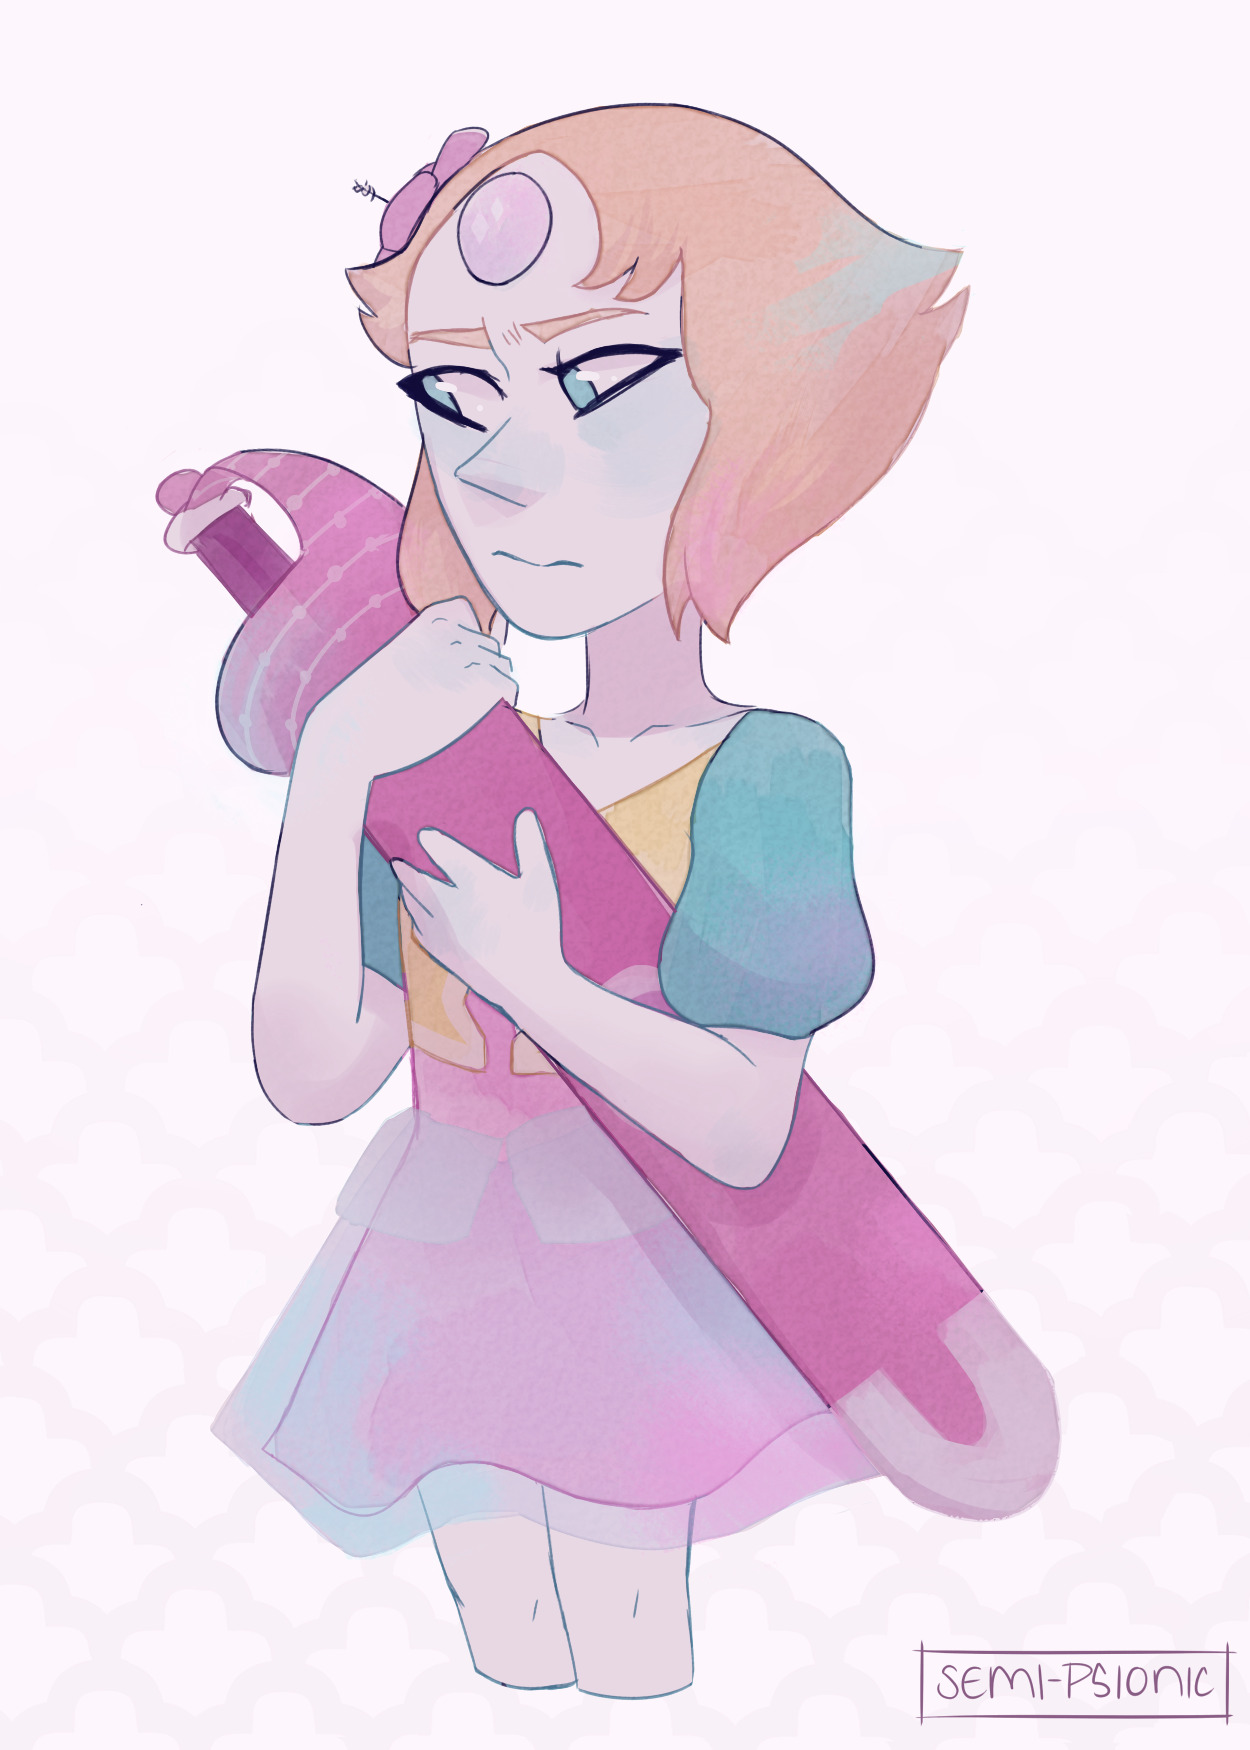 the result of playing with my favorite watercolor brush! this is the one time one of my pearl drawings has come out the way i wanted it to lol